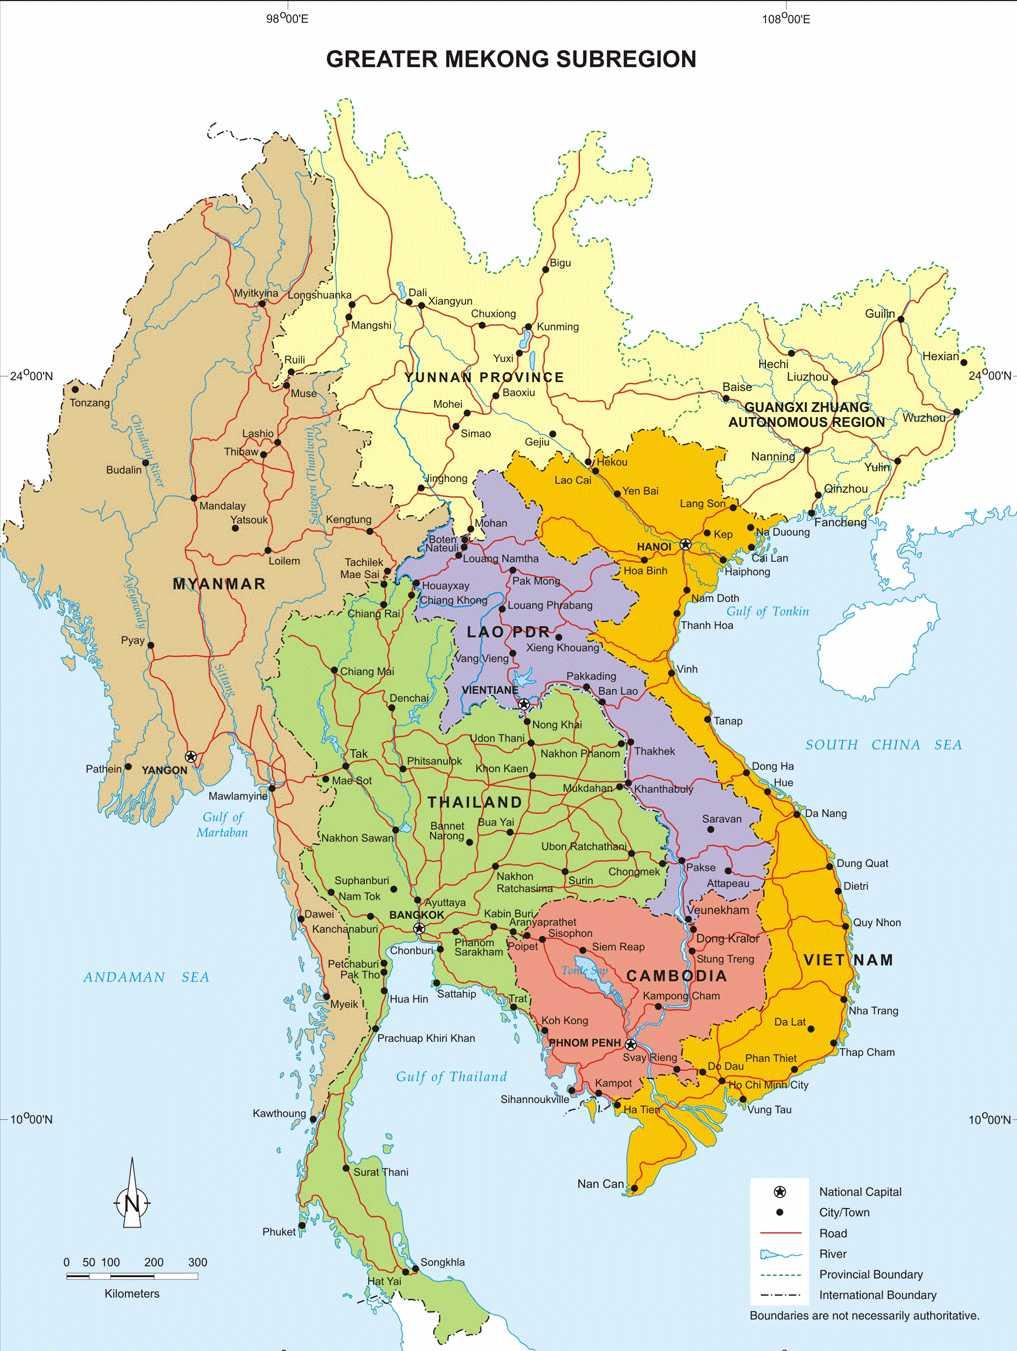 8. Brief overlook of the relations with each country in the Mekong region Lao PDR Japan is Top Donor of ODA 55th anniversary of the establishment of diplomatic relations President Choummaly will